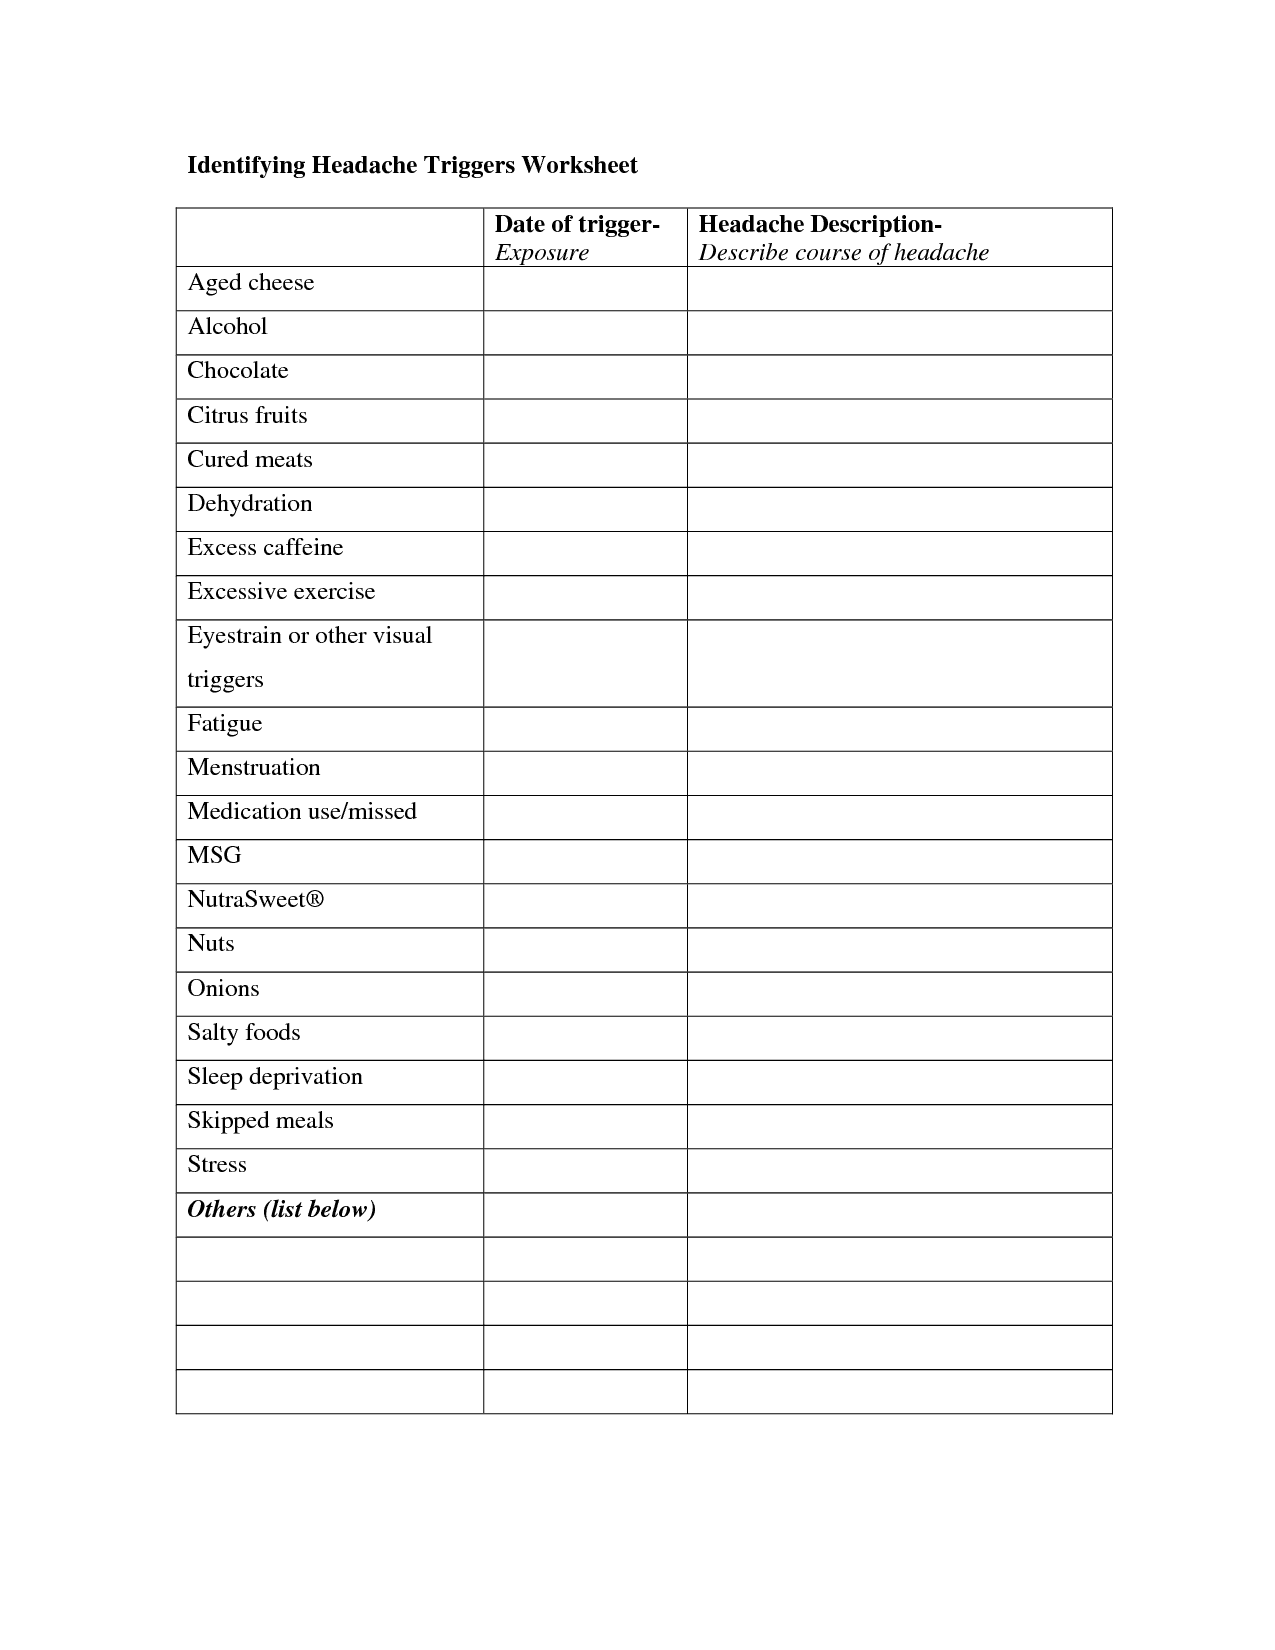 Free Substance Abuse Recovery Worksheets And Relapse Prevention Worksheets Mental Health